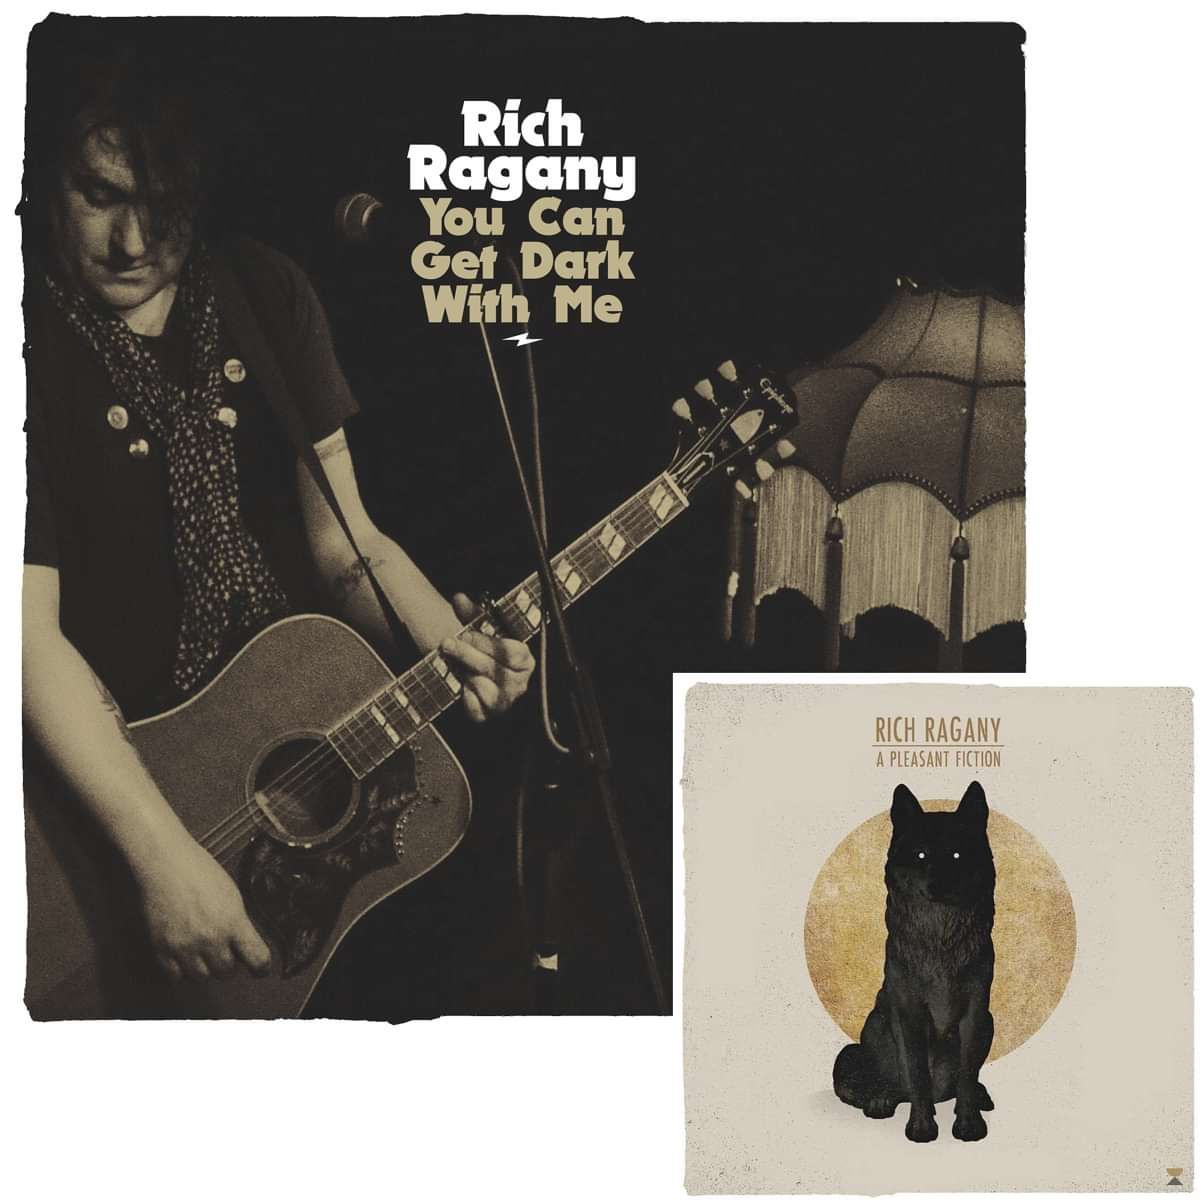 Rich Ragany - You Can Get Dark With Me - CD album + digital single - Barrel And Squidger Records